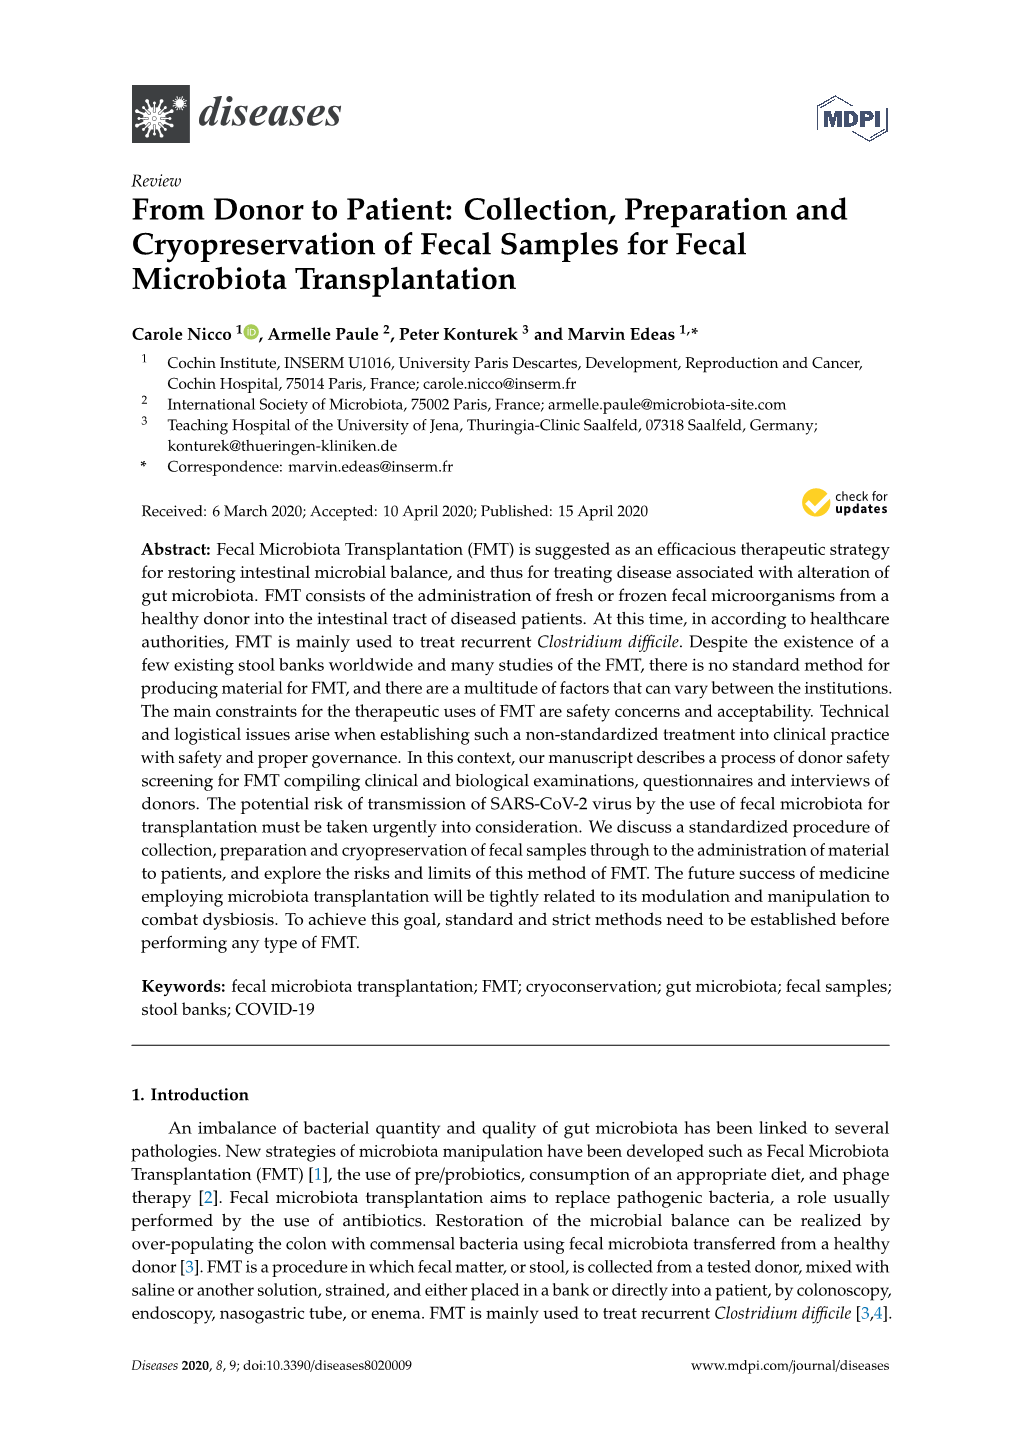 From Donor to Patient: Collection, Preparation and Cryopreservation of Fecal Samples for Fecal Microbiota Transplantation